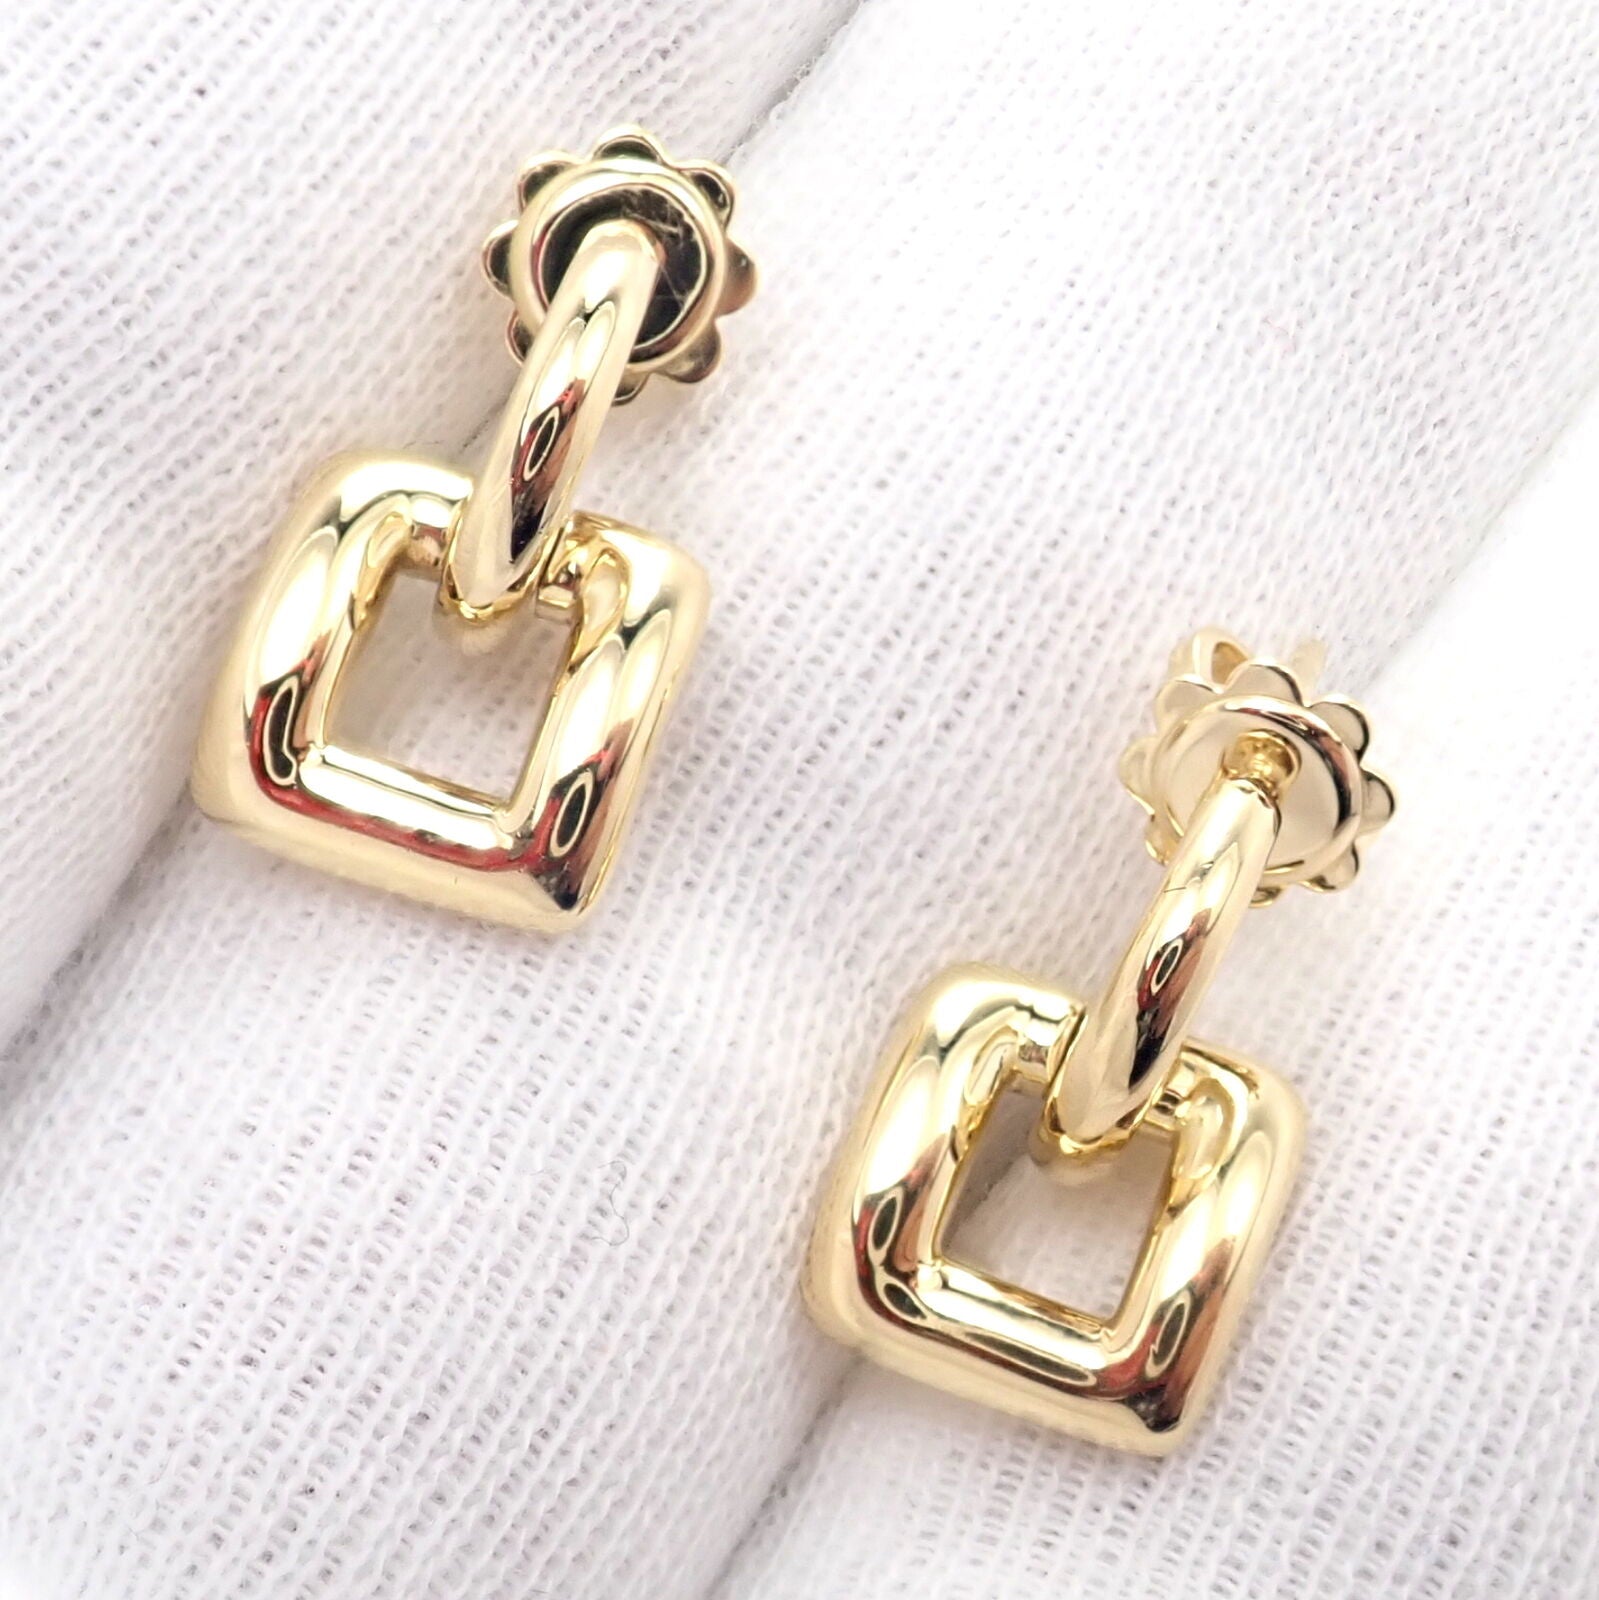 Tiffany & Co. Jewelry & Watches:Fine Jewelry:Earrings Rare! Authentic Vintage Tiffany & Co 18k Yellow Gold Square Earrings 2001